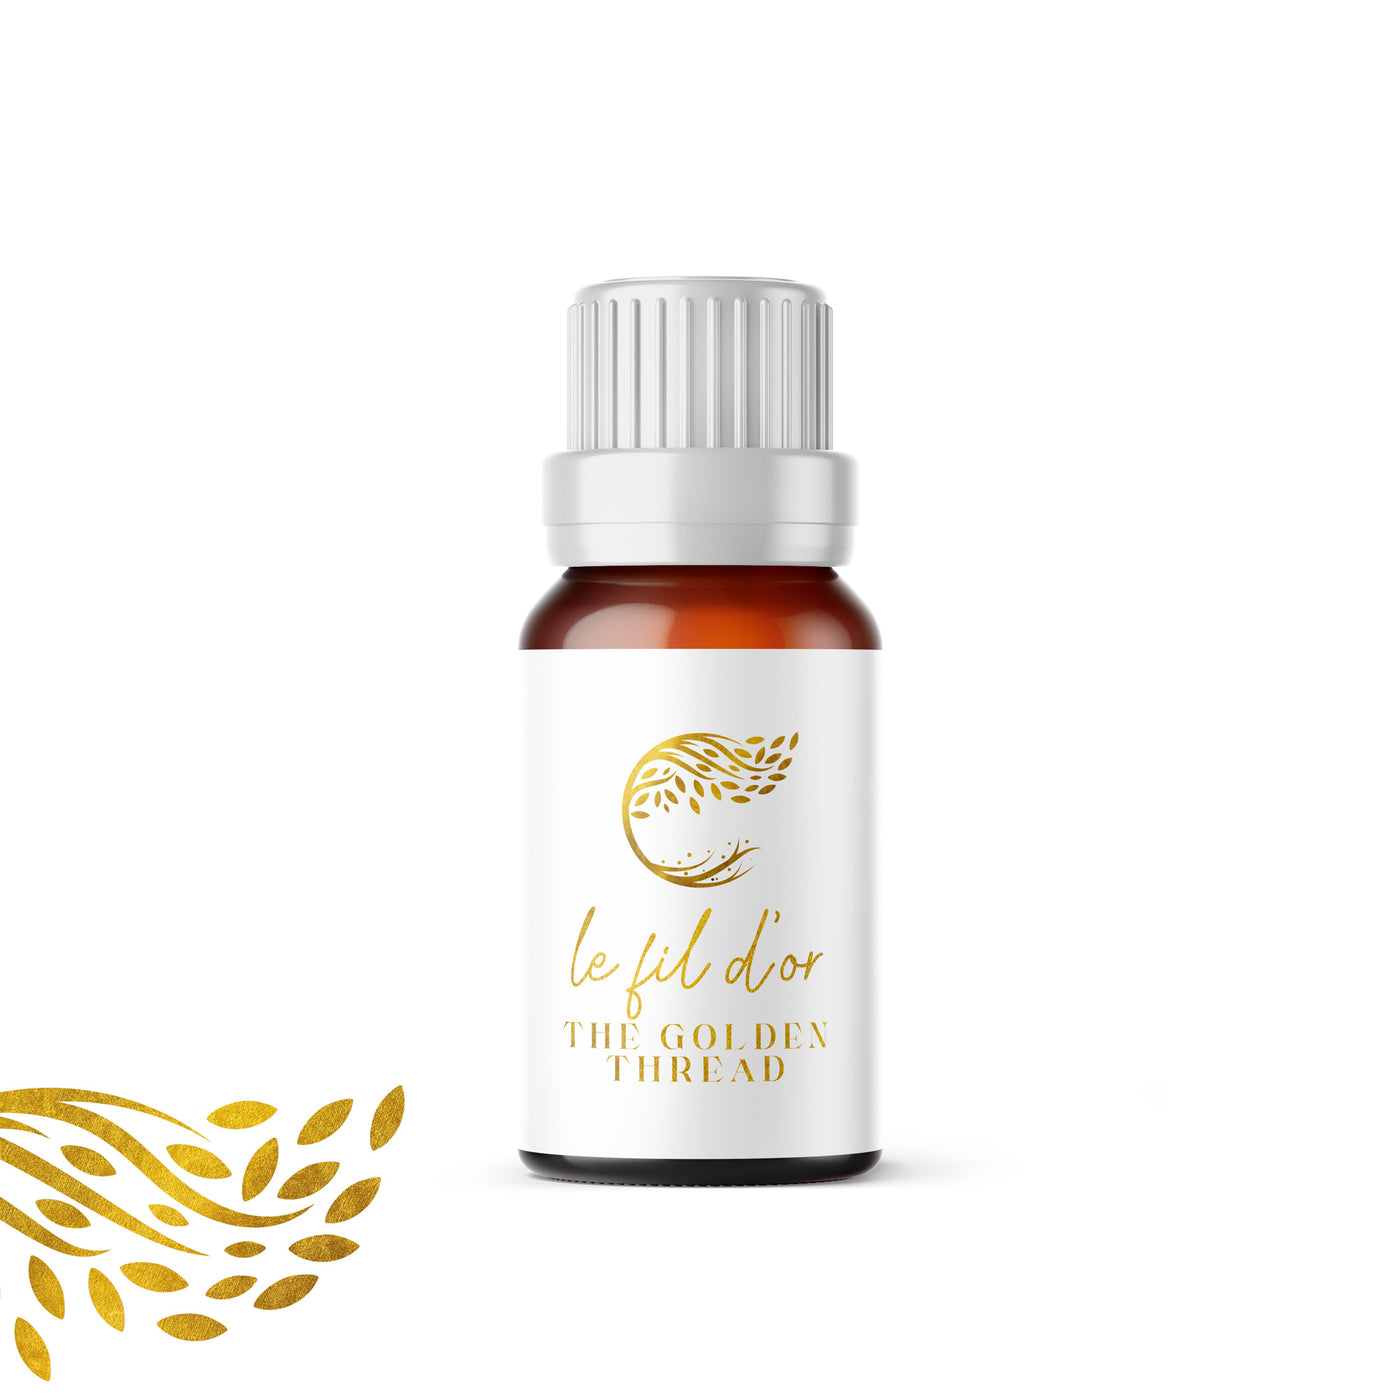 Le fil d'or - Synergie aromatique 100% pure